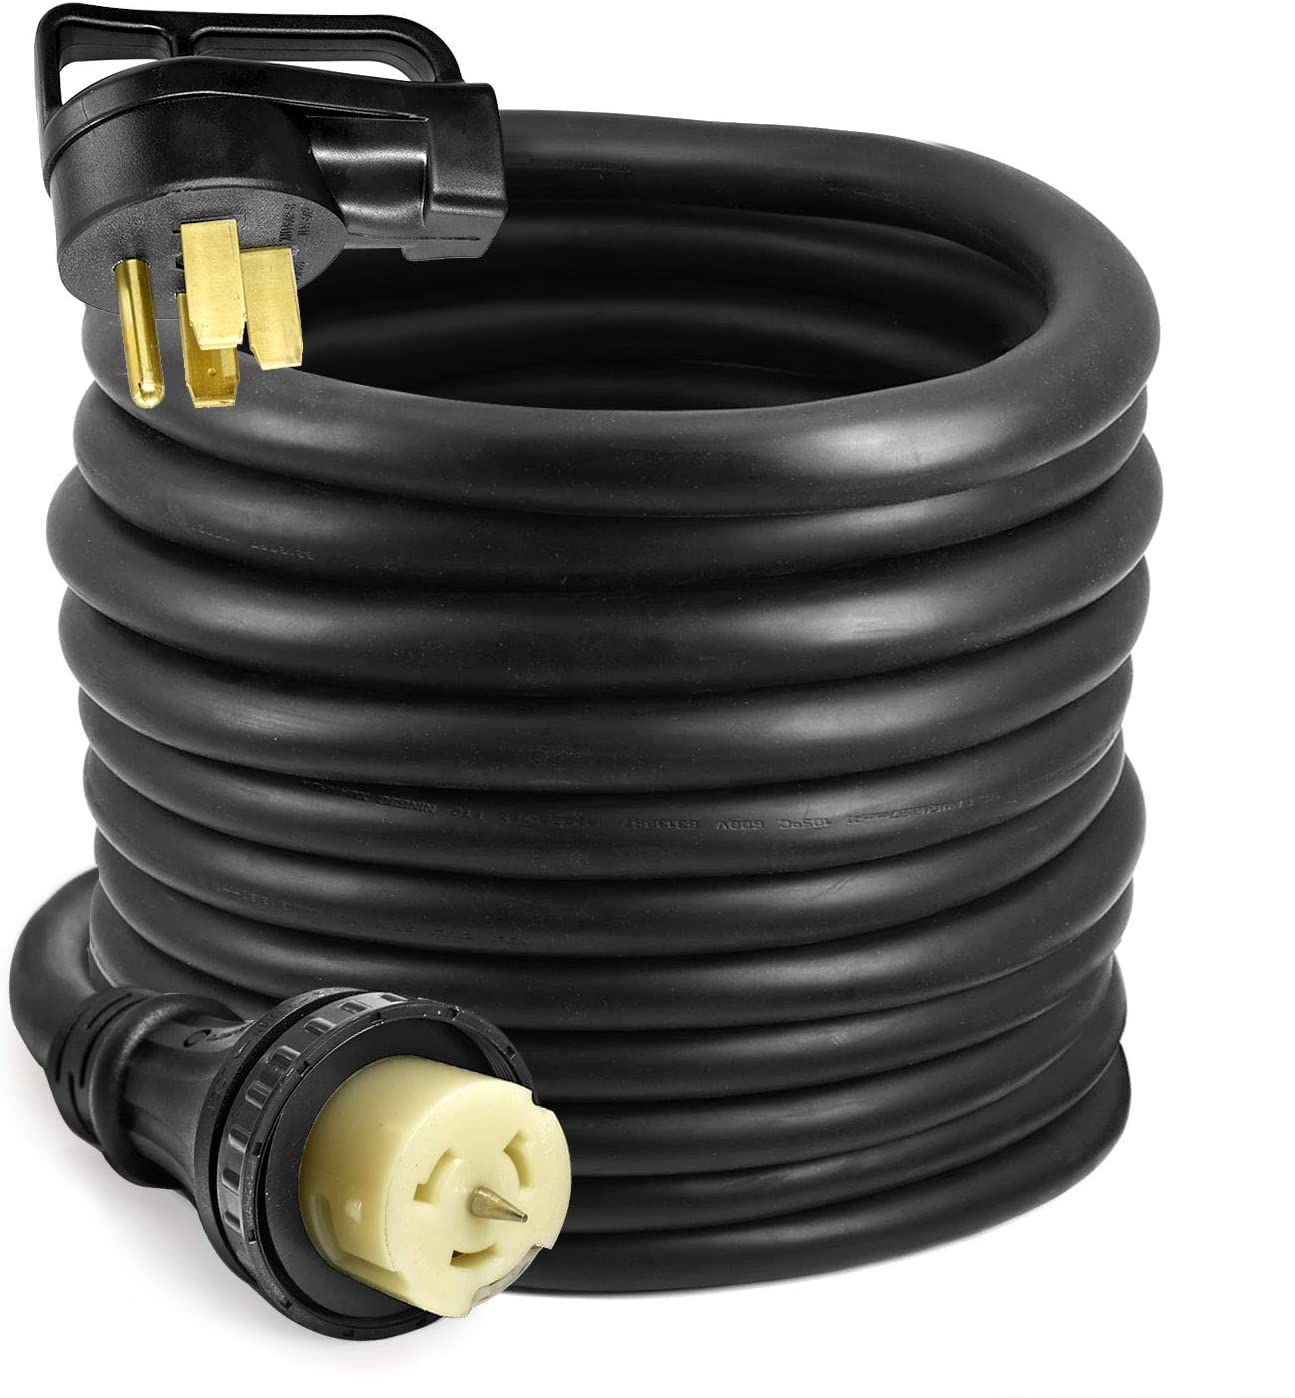 Generator Power Cord 15 ft. 50 Amp RV Extension Cord STW 12,000-Watt 250-Volt N14-50 Outlet ETL Listed Pure Copper Cable